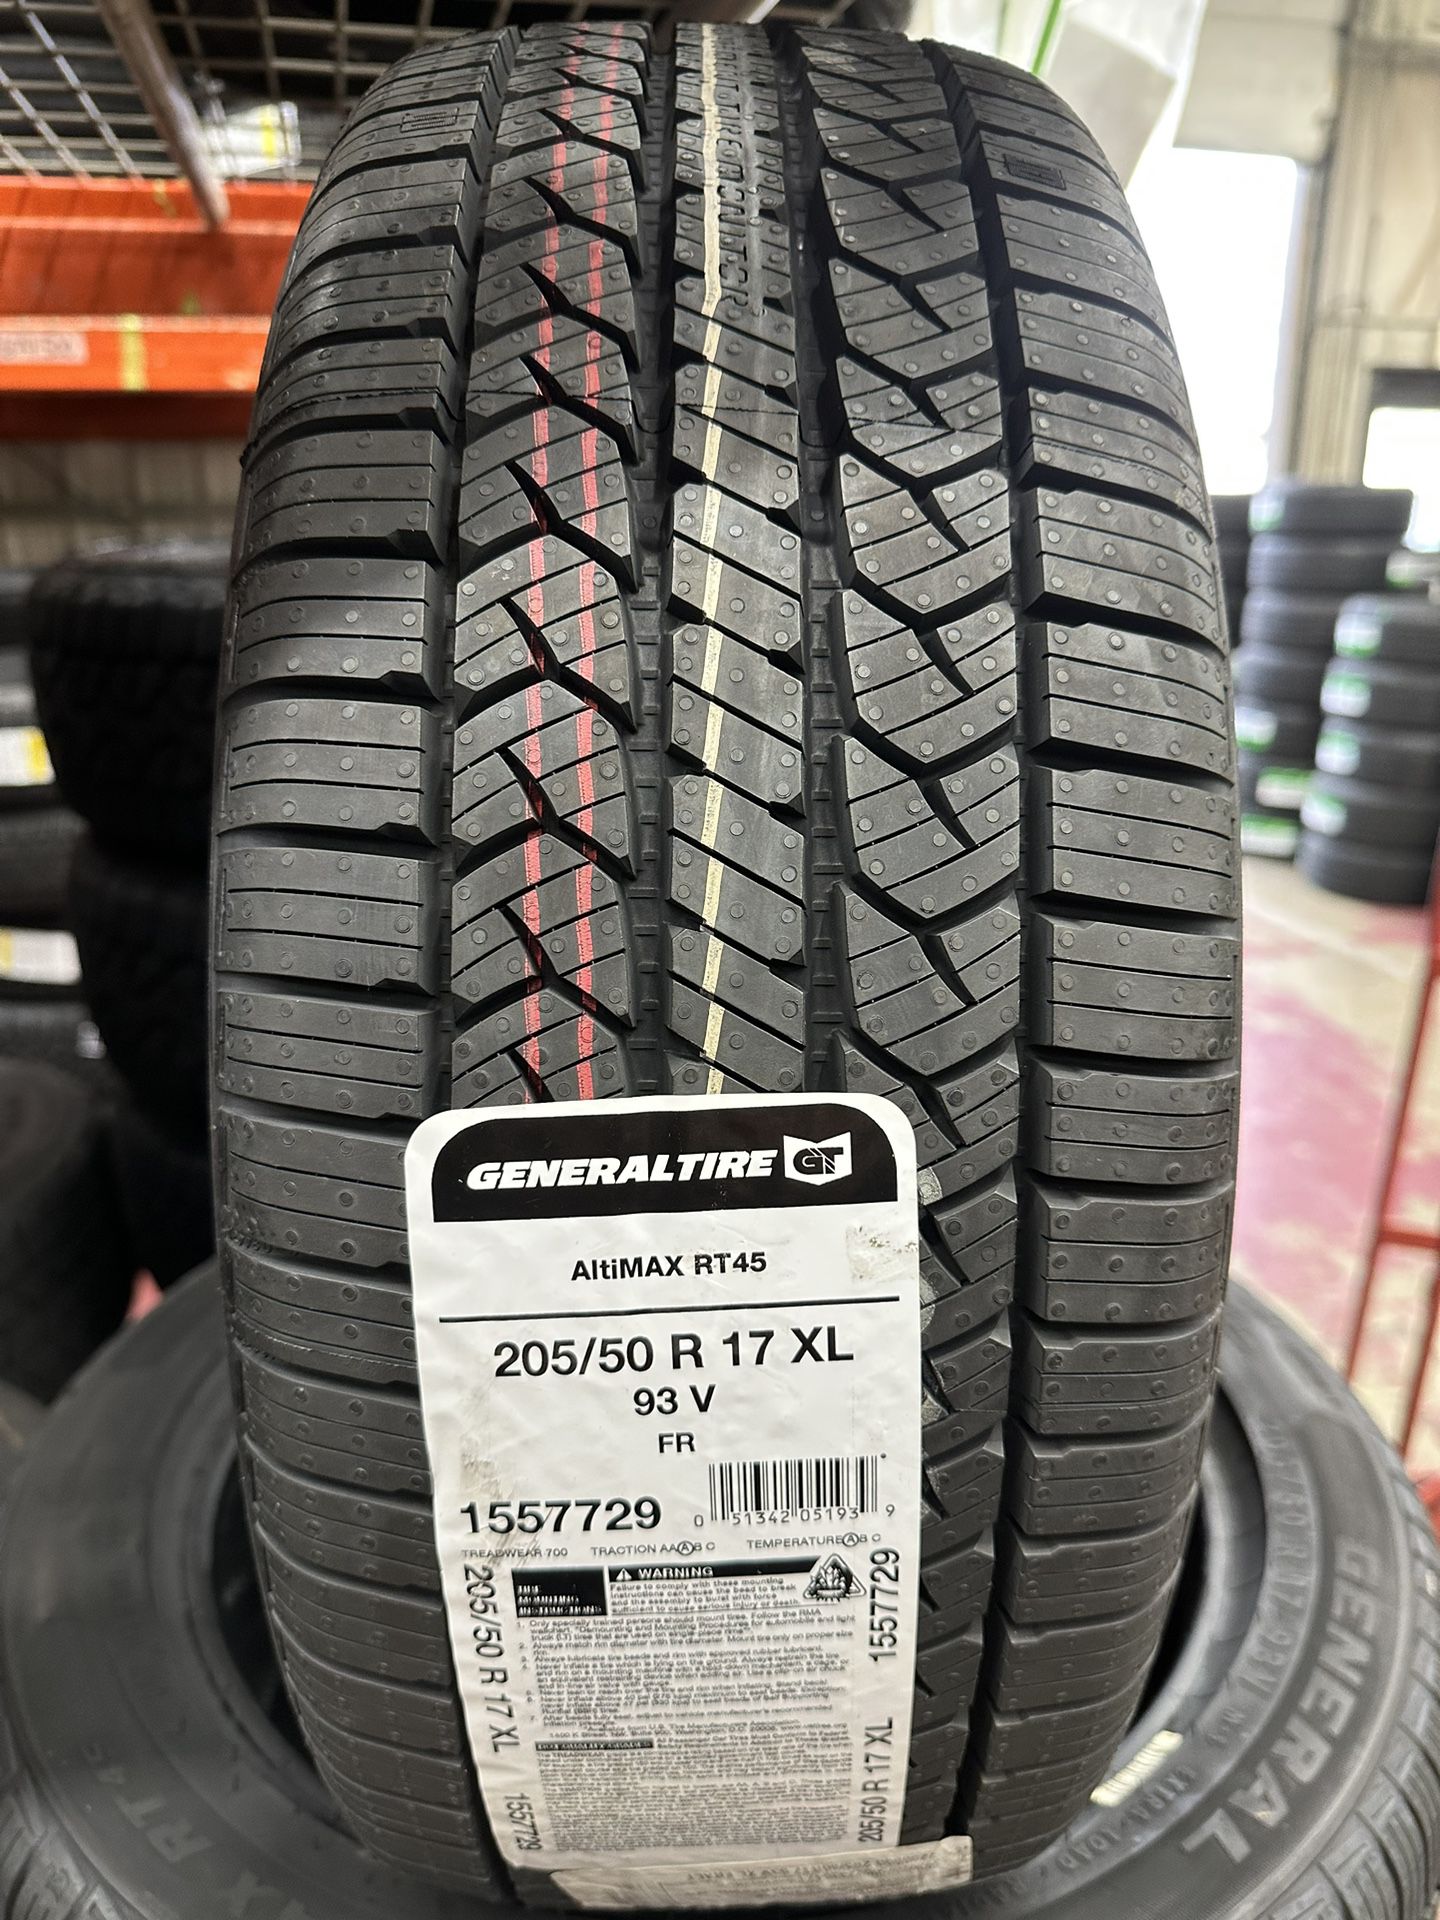 4 New Tires 205/50/17 General Tires for Sale in North Bethesda, MD